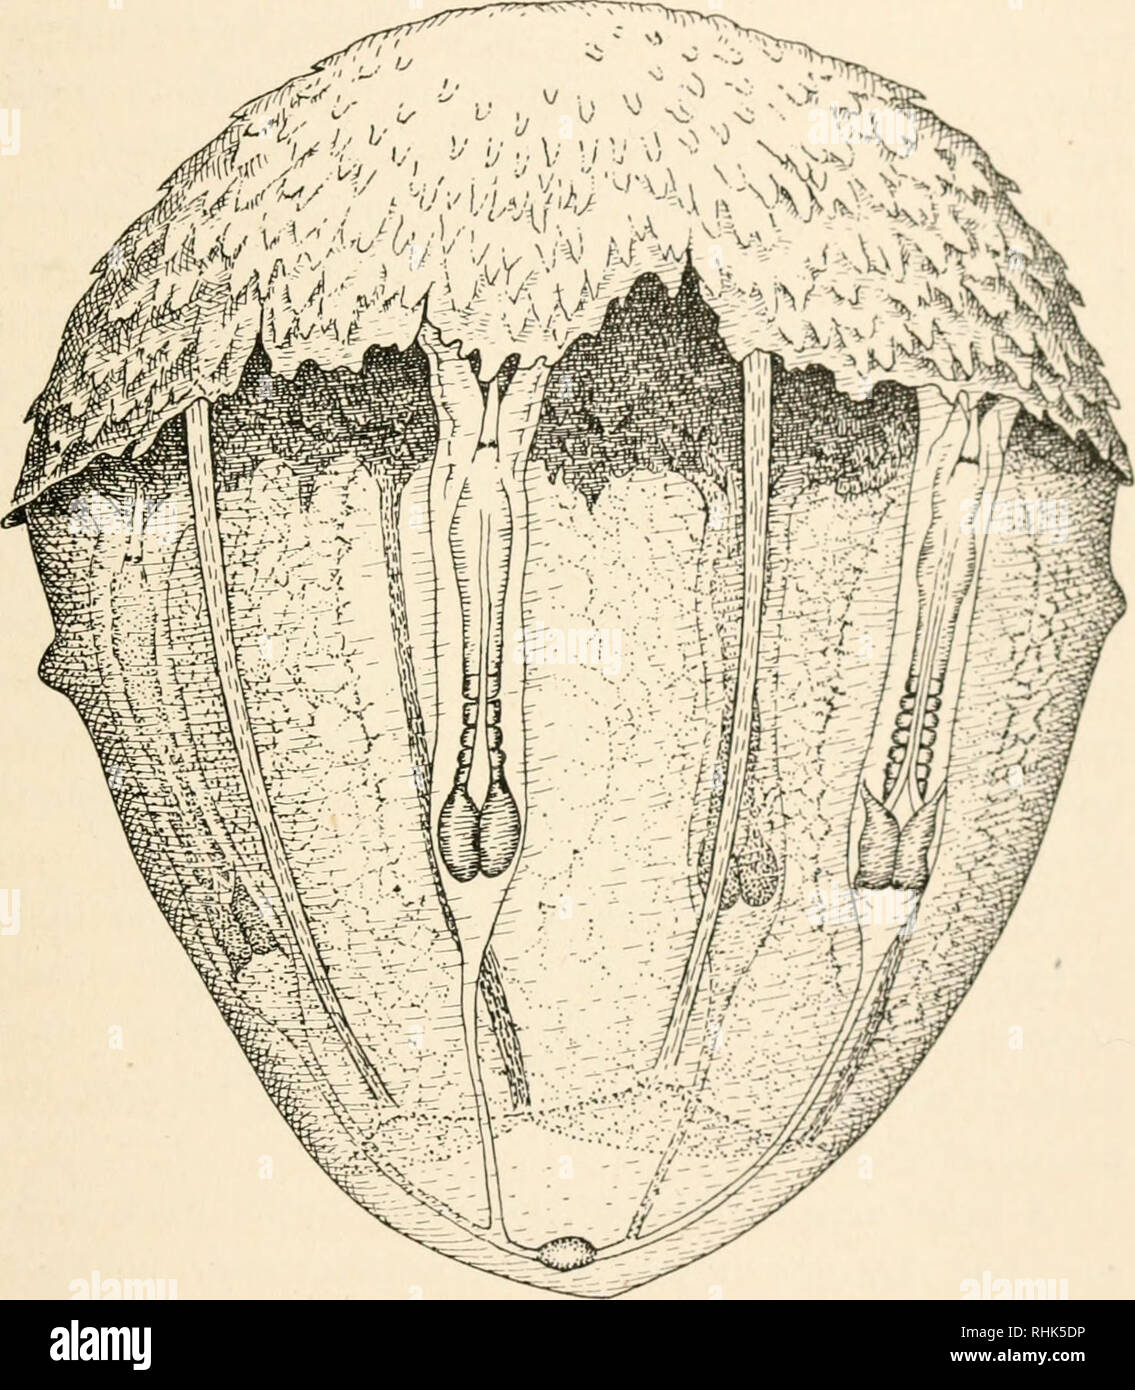 . The biology of twins (mammals). Twins. TWINNING IN DASYPUS NOVEMCINCTUS 57 Vitelline blood vessels, arranged somewhat as in the area pellucida and area opaqua of the avian egg, are. Fig. 18.—Armadillo egg showing that the primary embryos (II and IV) are in advance of the secondary embryos (I and III). The primary placenta as Trager is becoming displaced by the secondary true placenta, which is covered with villi, or short finger-like processes (see stage X). (Redrawn from Newman and Patterson.) very characteristic features of this stage; no blood is found in this vitelline area and no vitell Stock Photo